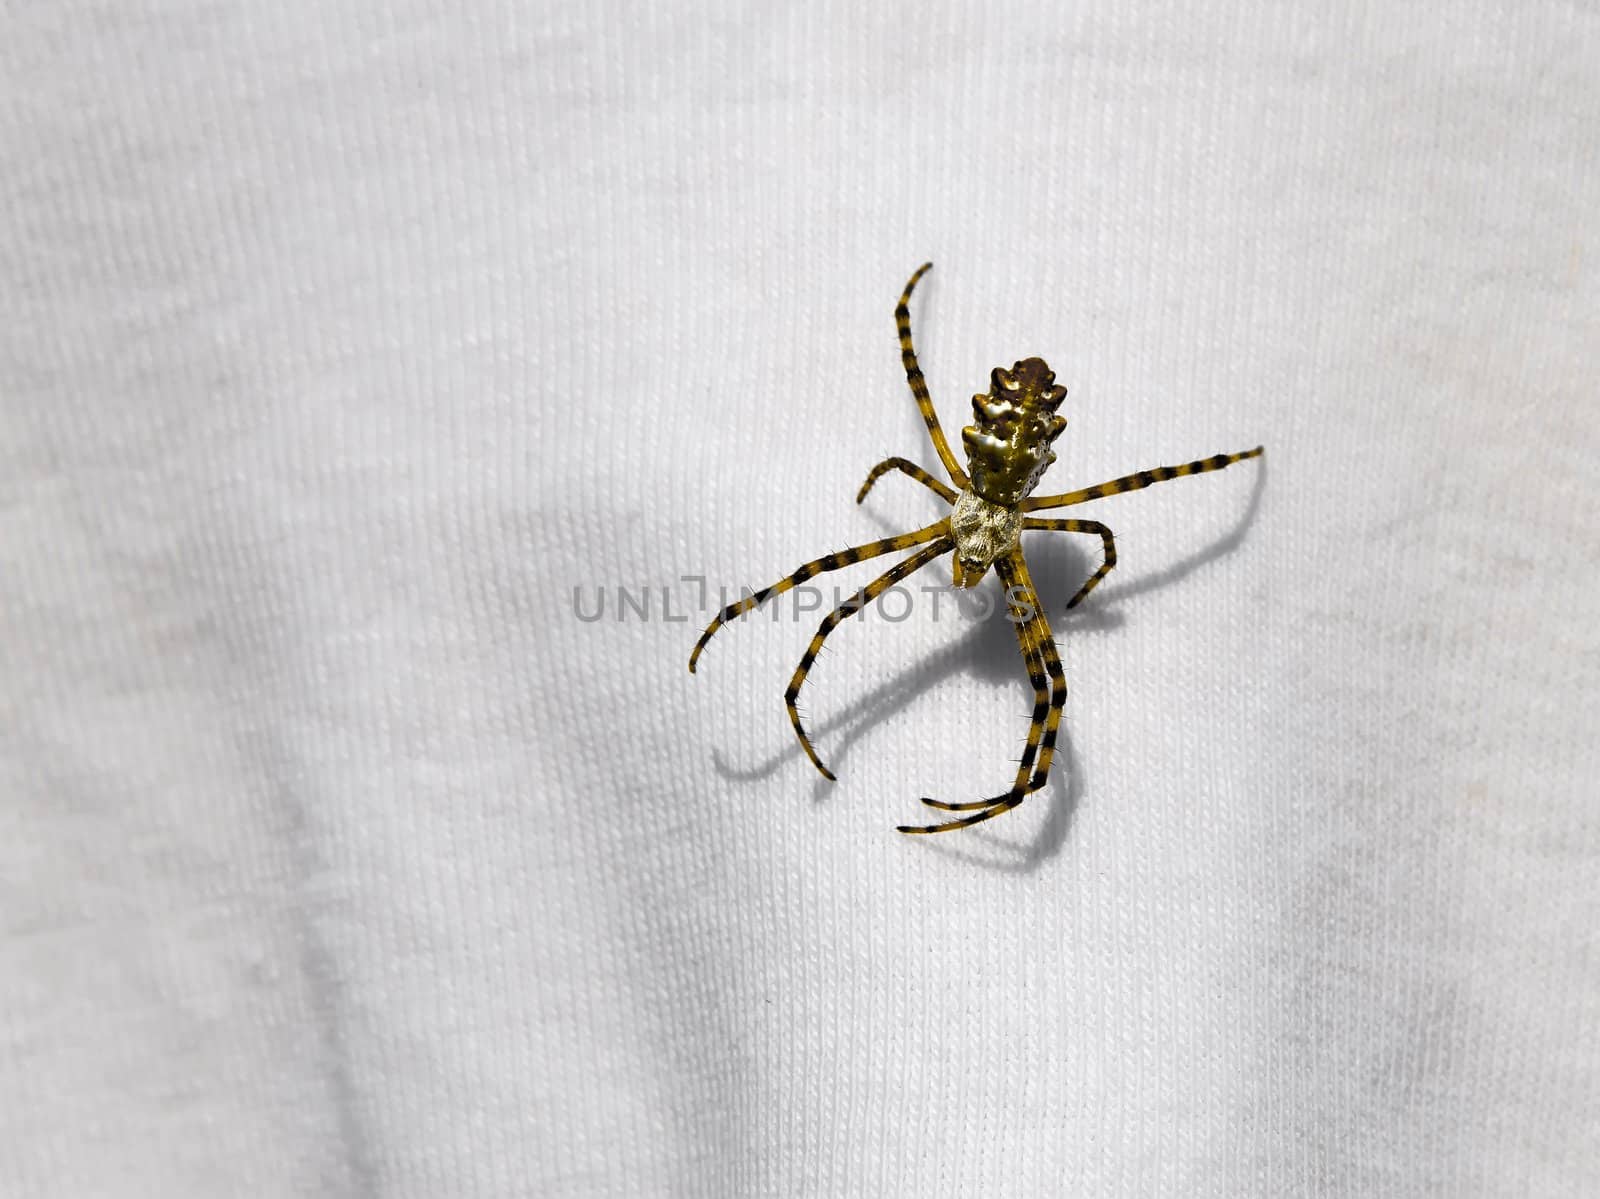 Spider sits on the fabric by qiiip